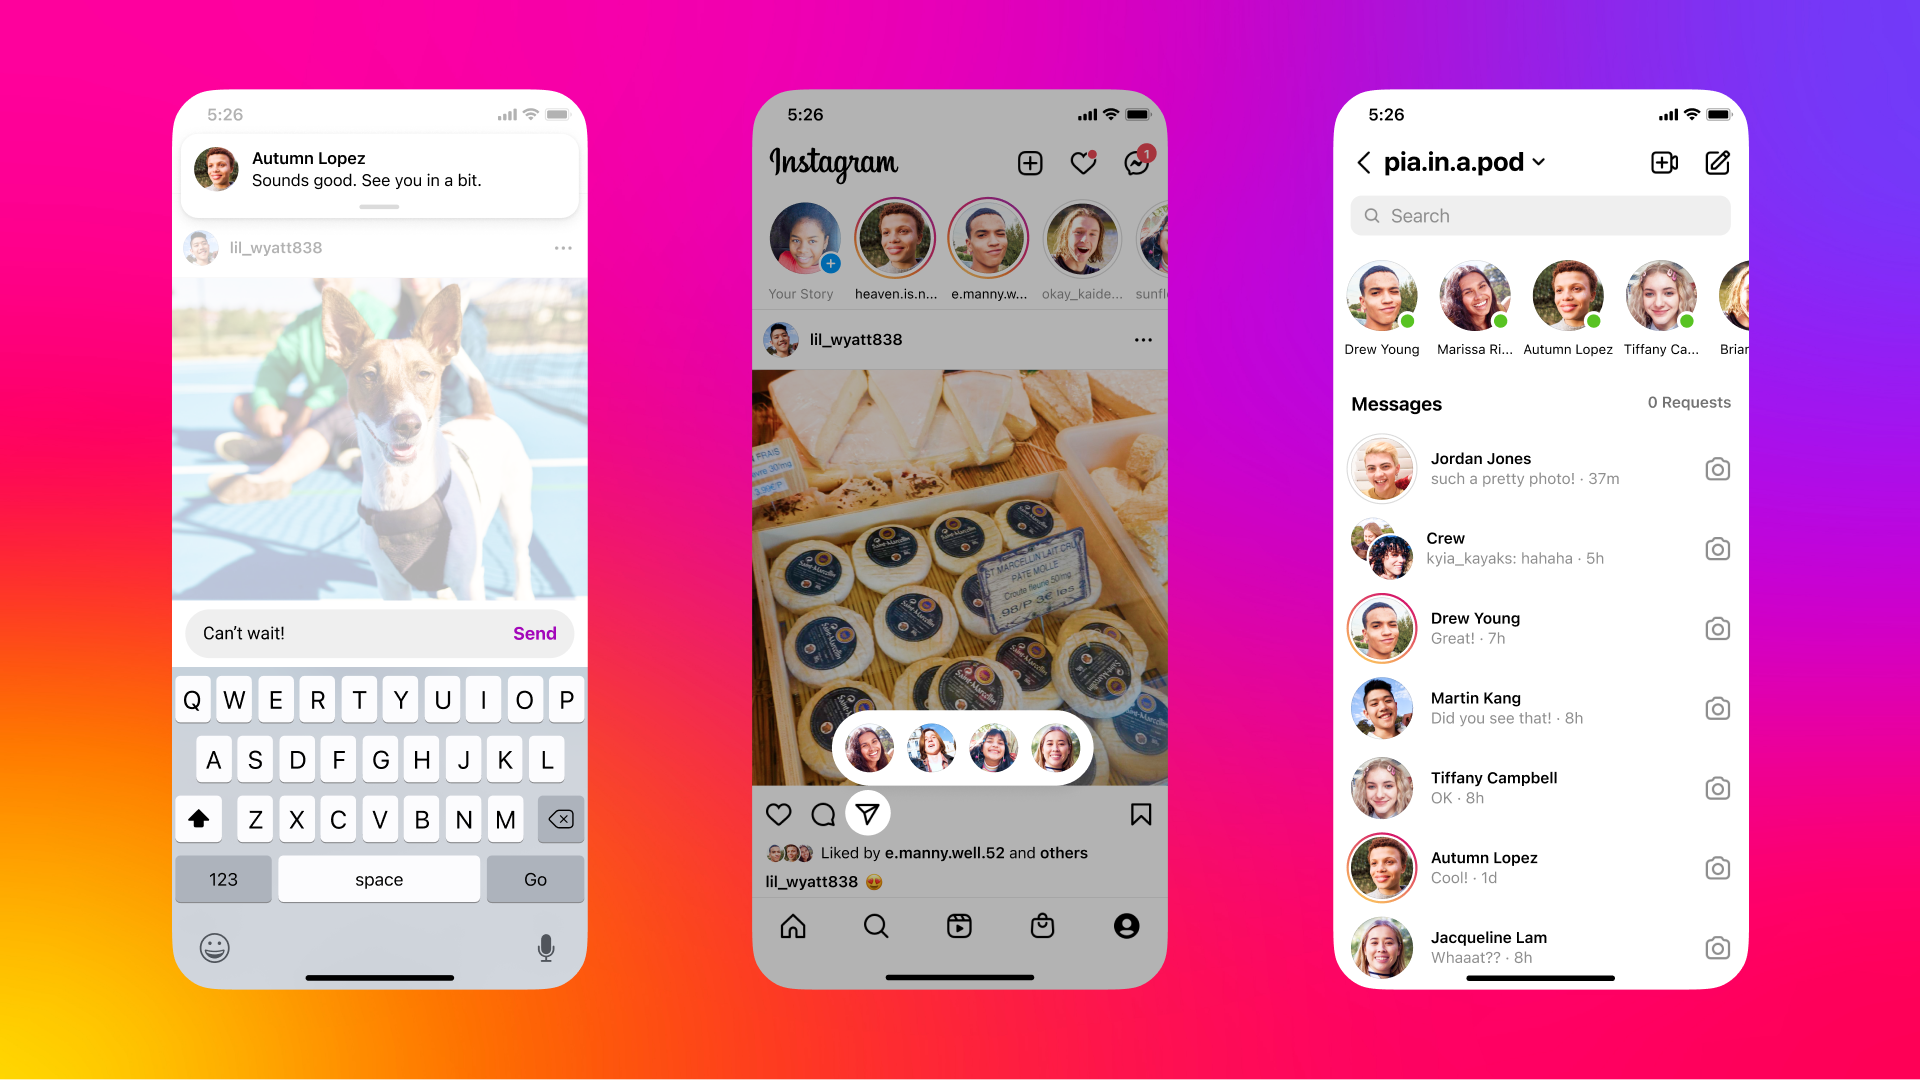 New Instagram Messaging Features 2022 - reply in feed, share from feed, who is online